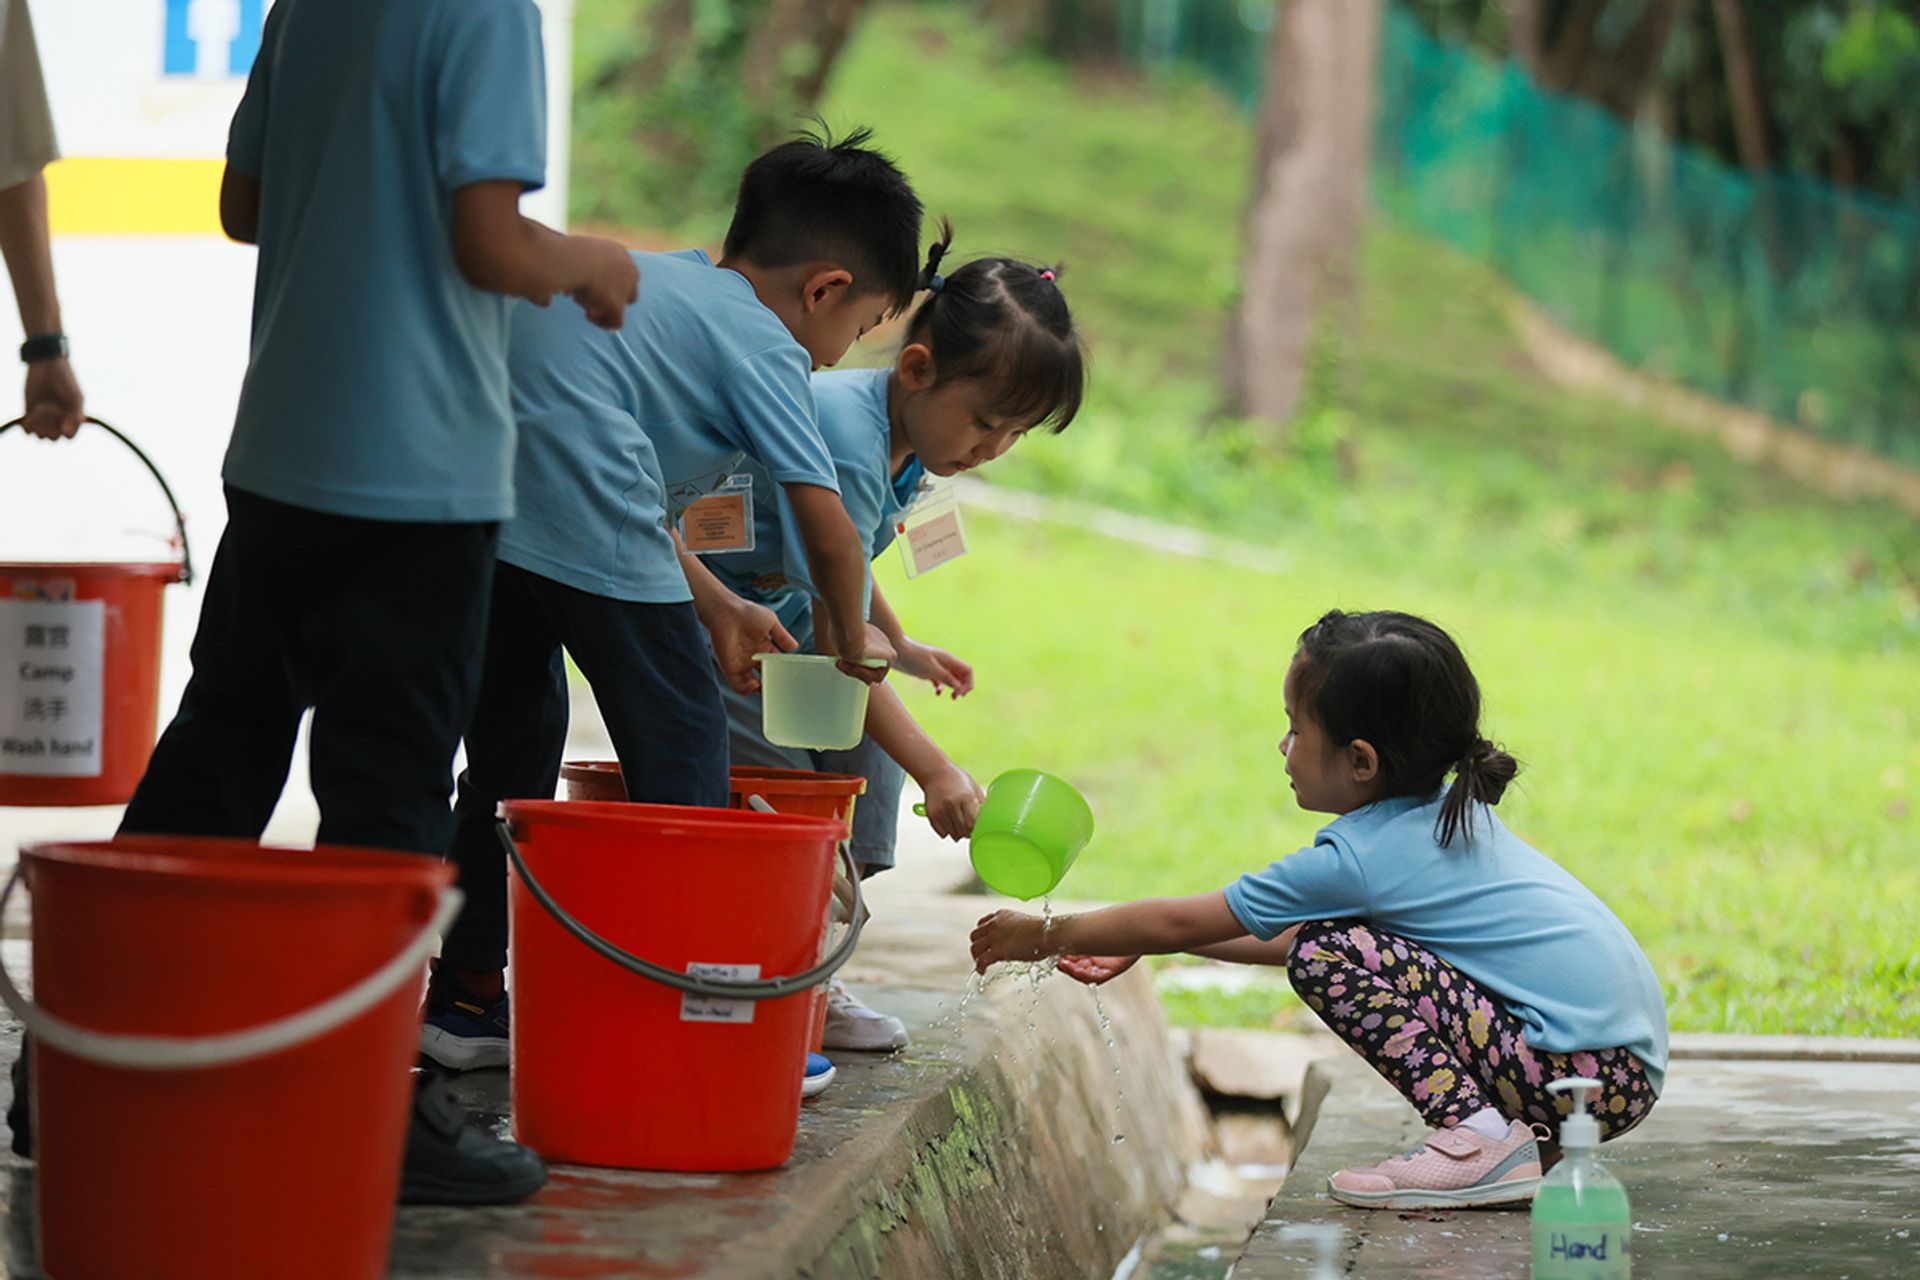 Children take turns to help one another to wash and clean up after preparing a meal at the campsite.